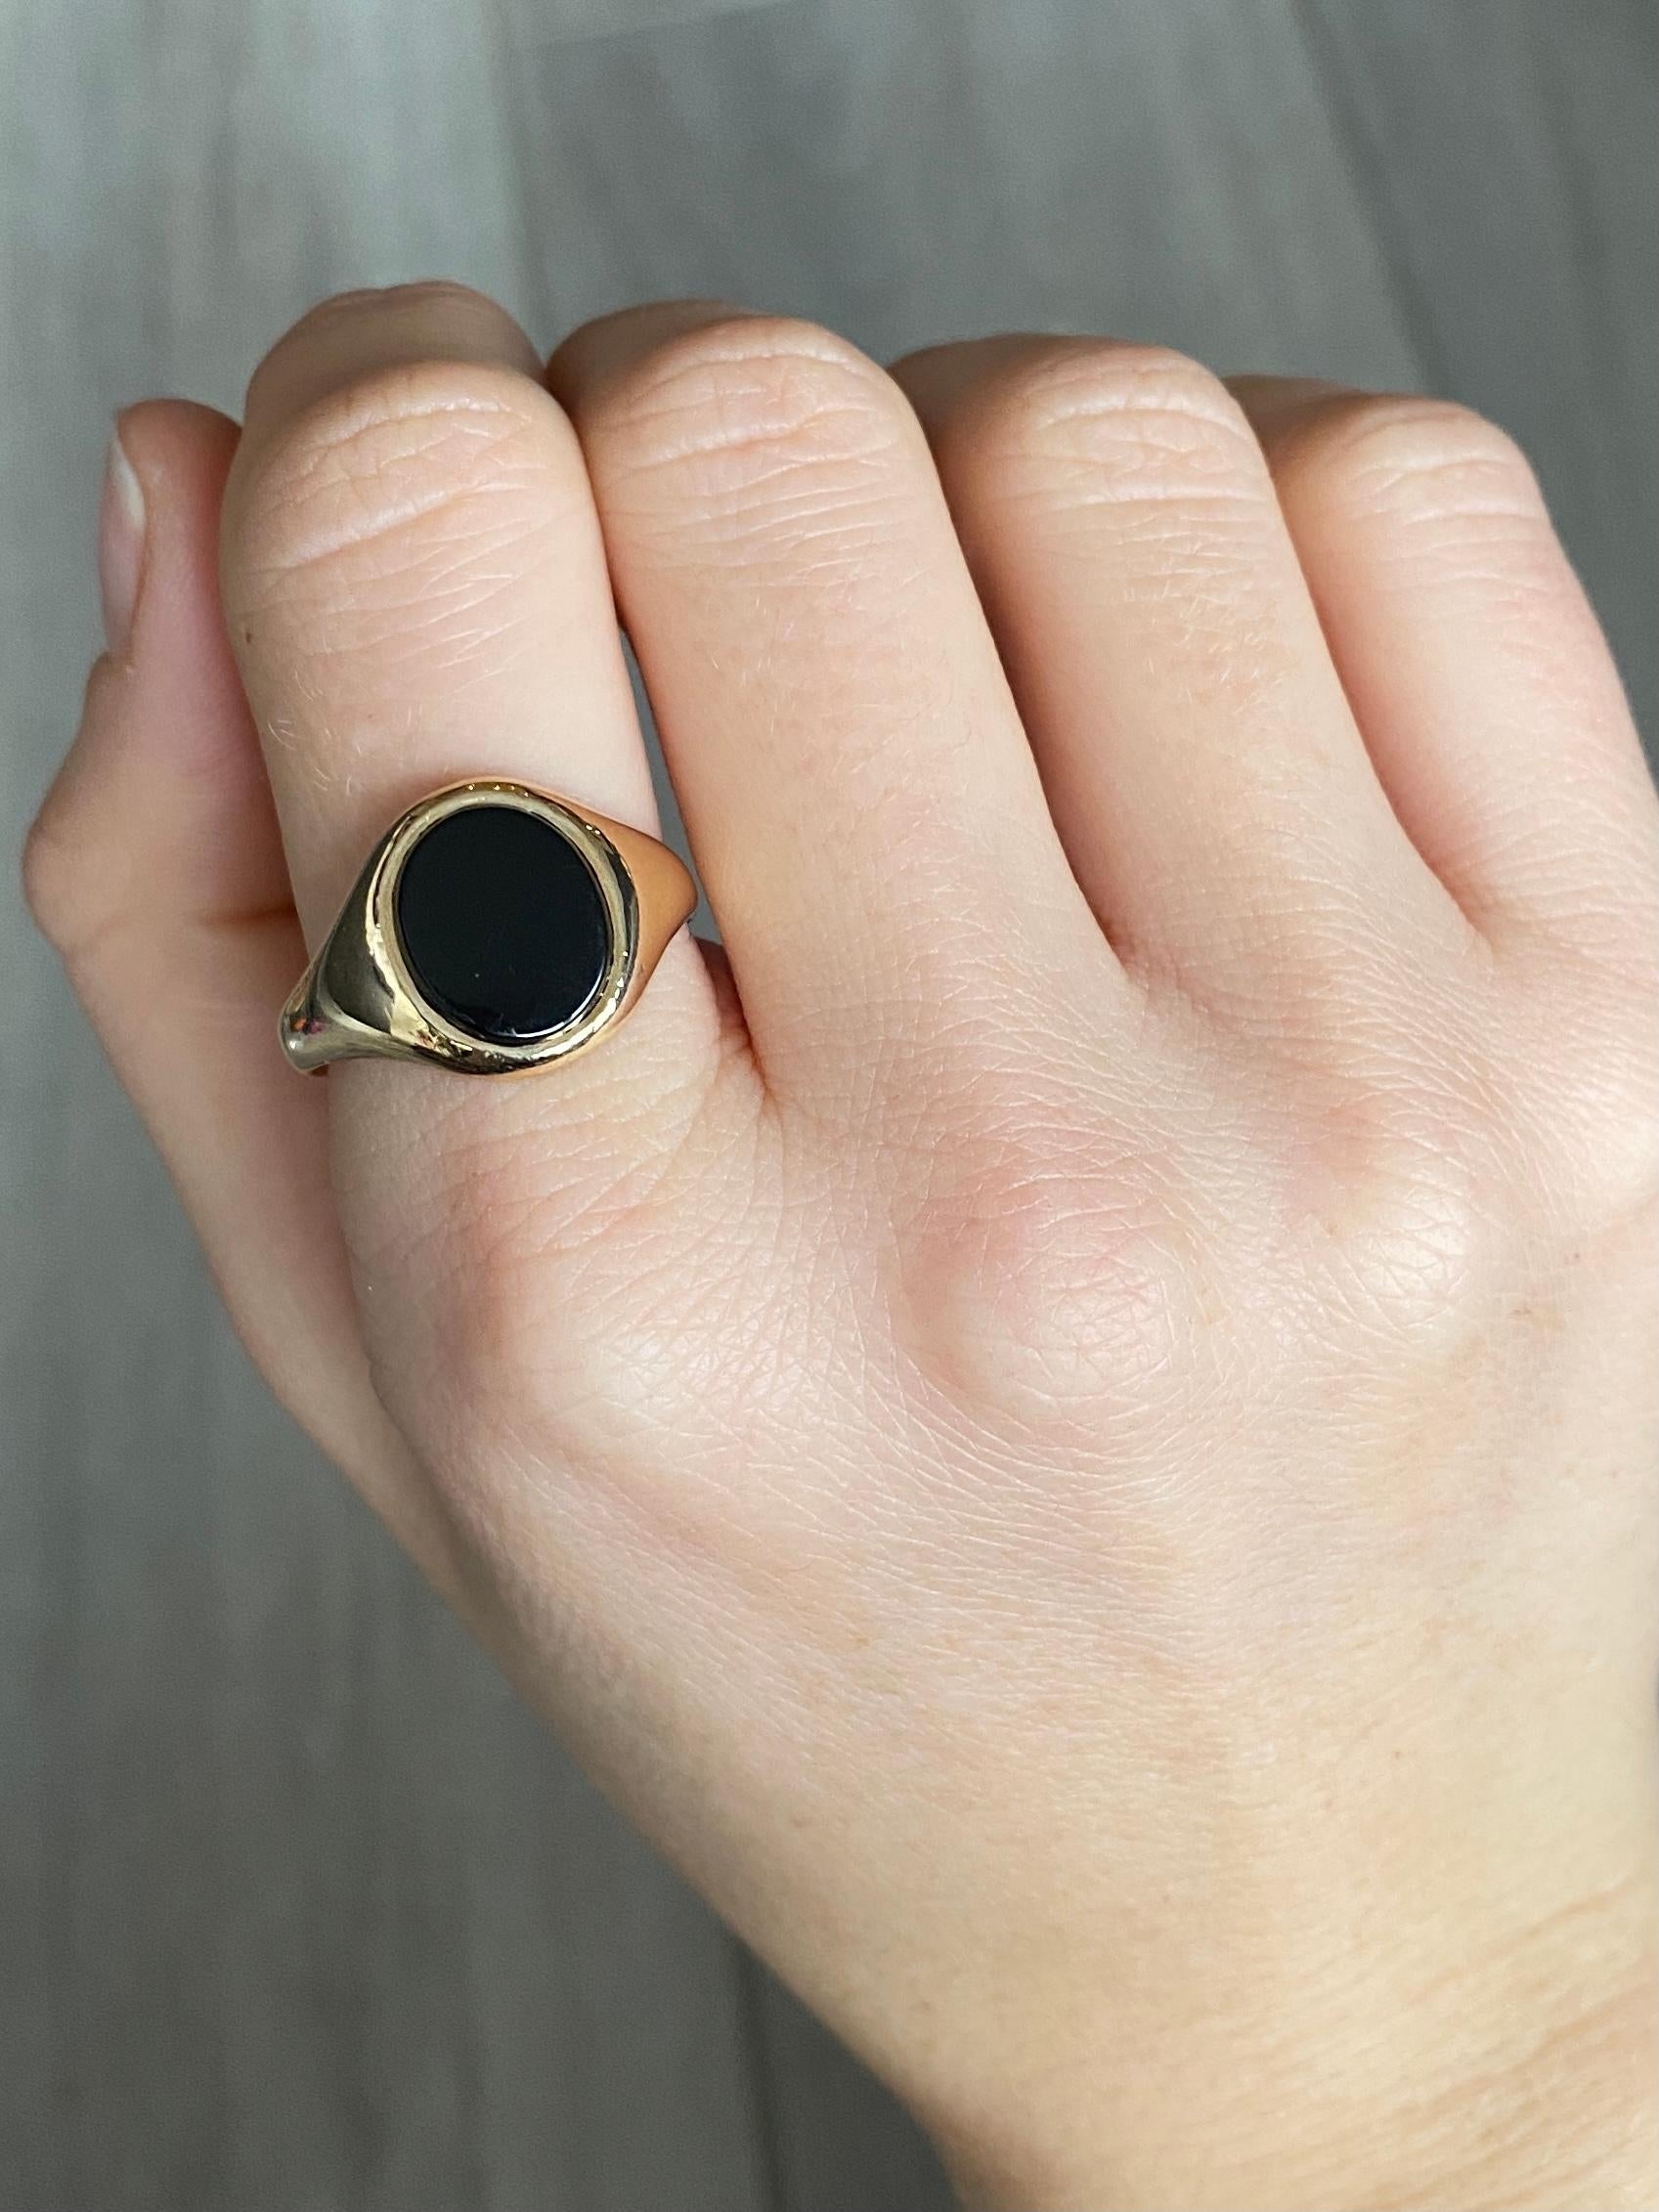 black onyx signet ring meaning